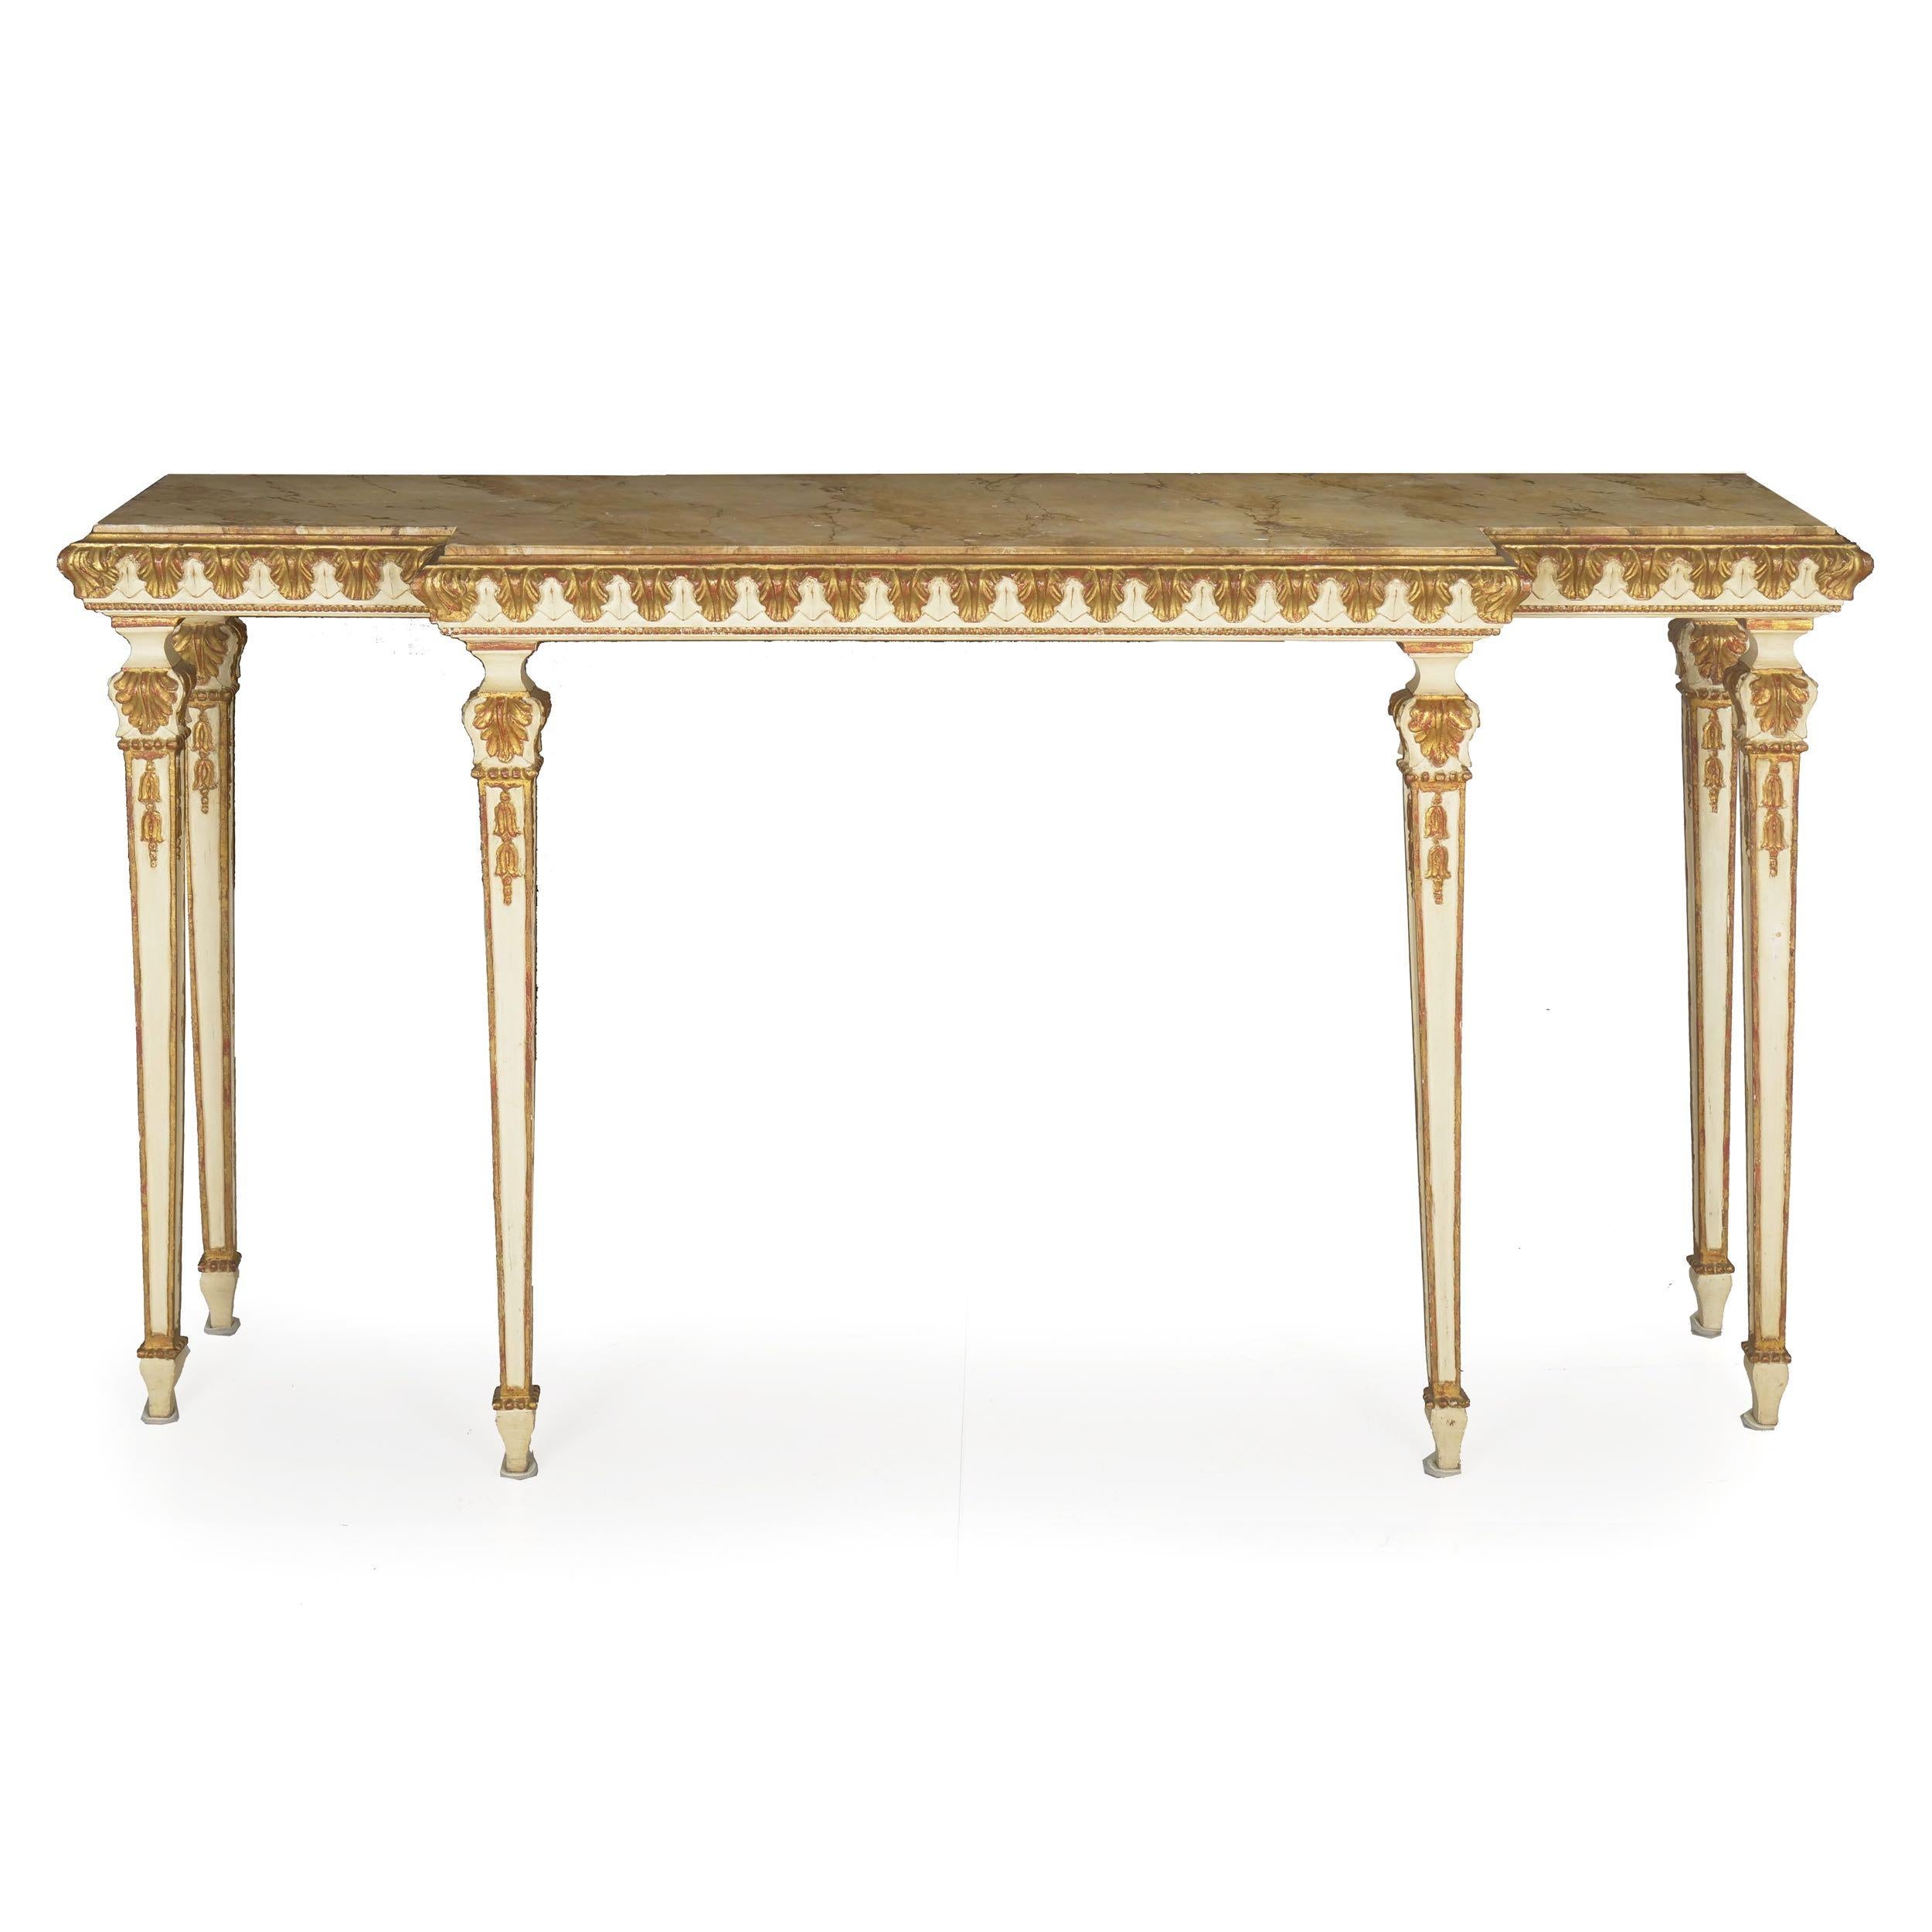 Neoclassical style parcel gilt console table with faux-marble painted top
Continental, circa mid-20th century
Item # 007LQG30U 

An attractive 20th century console carved in the manner of the neoclassical forms of a century prior, this lovely